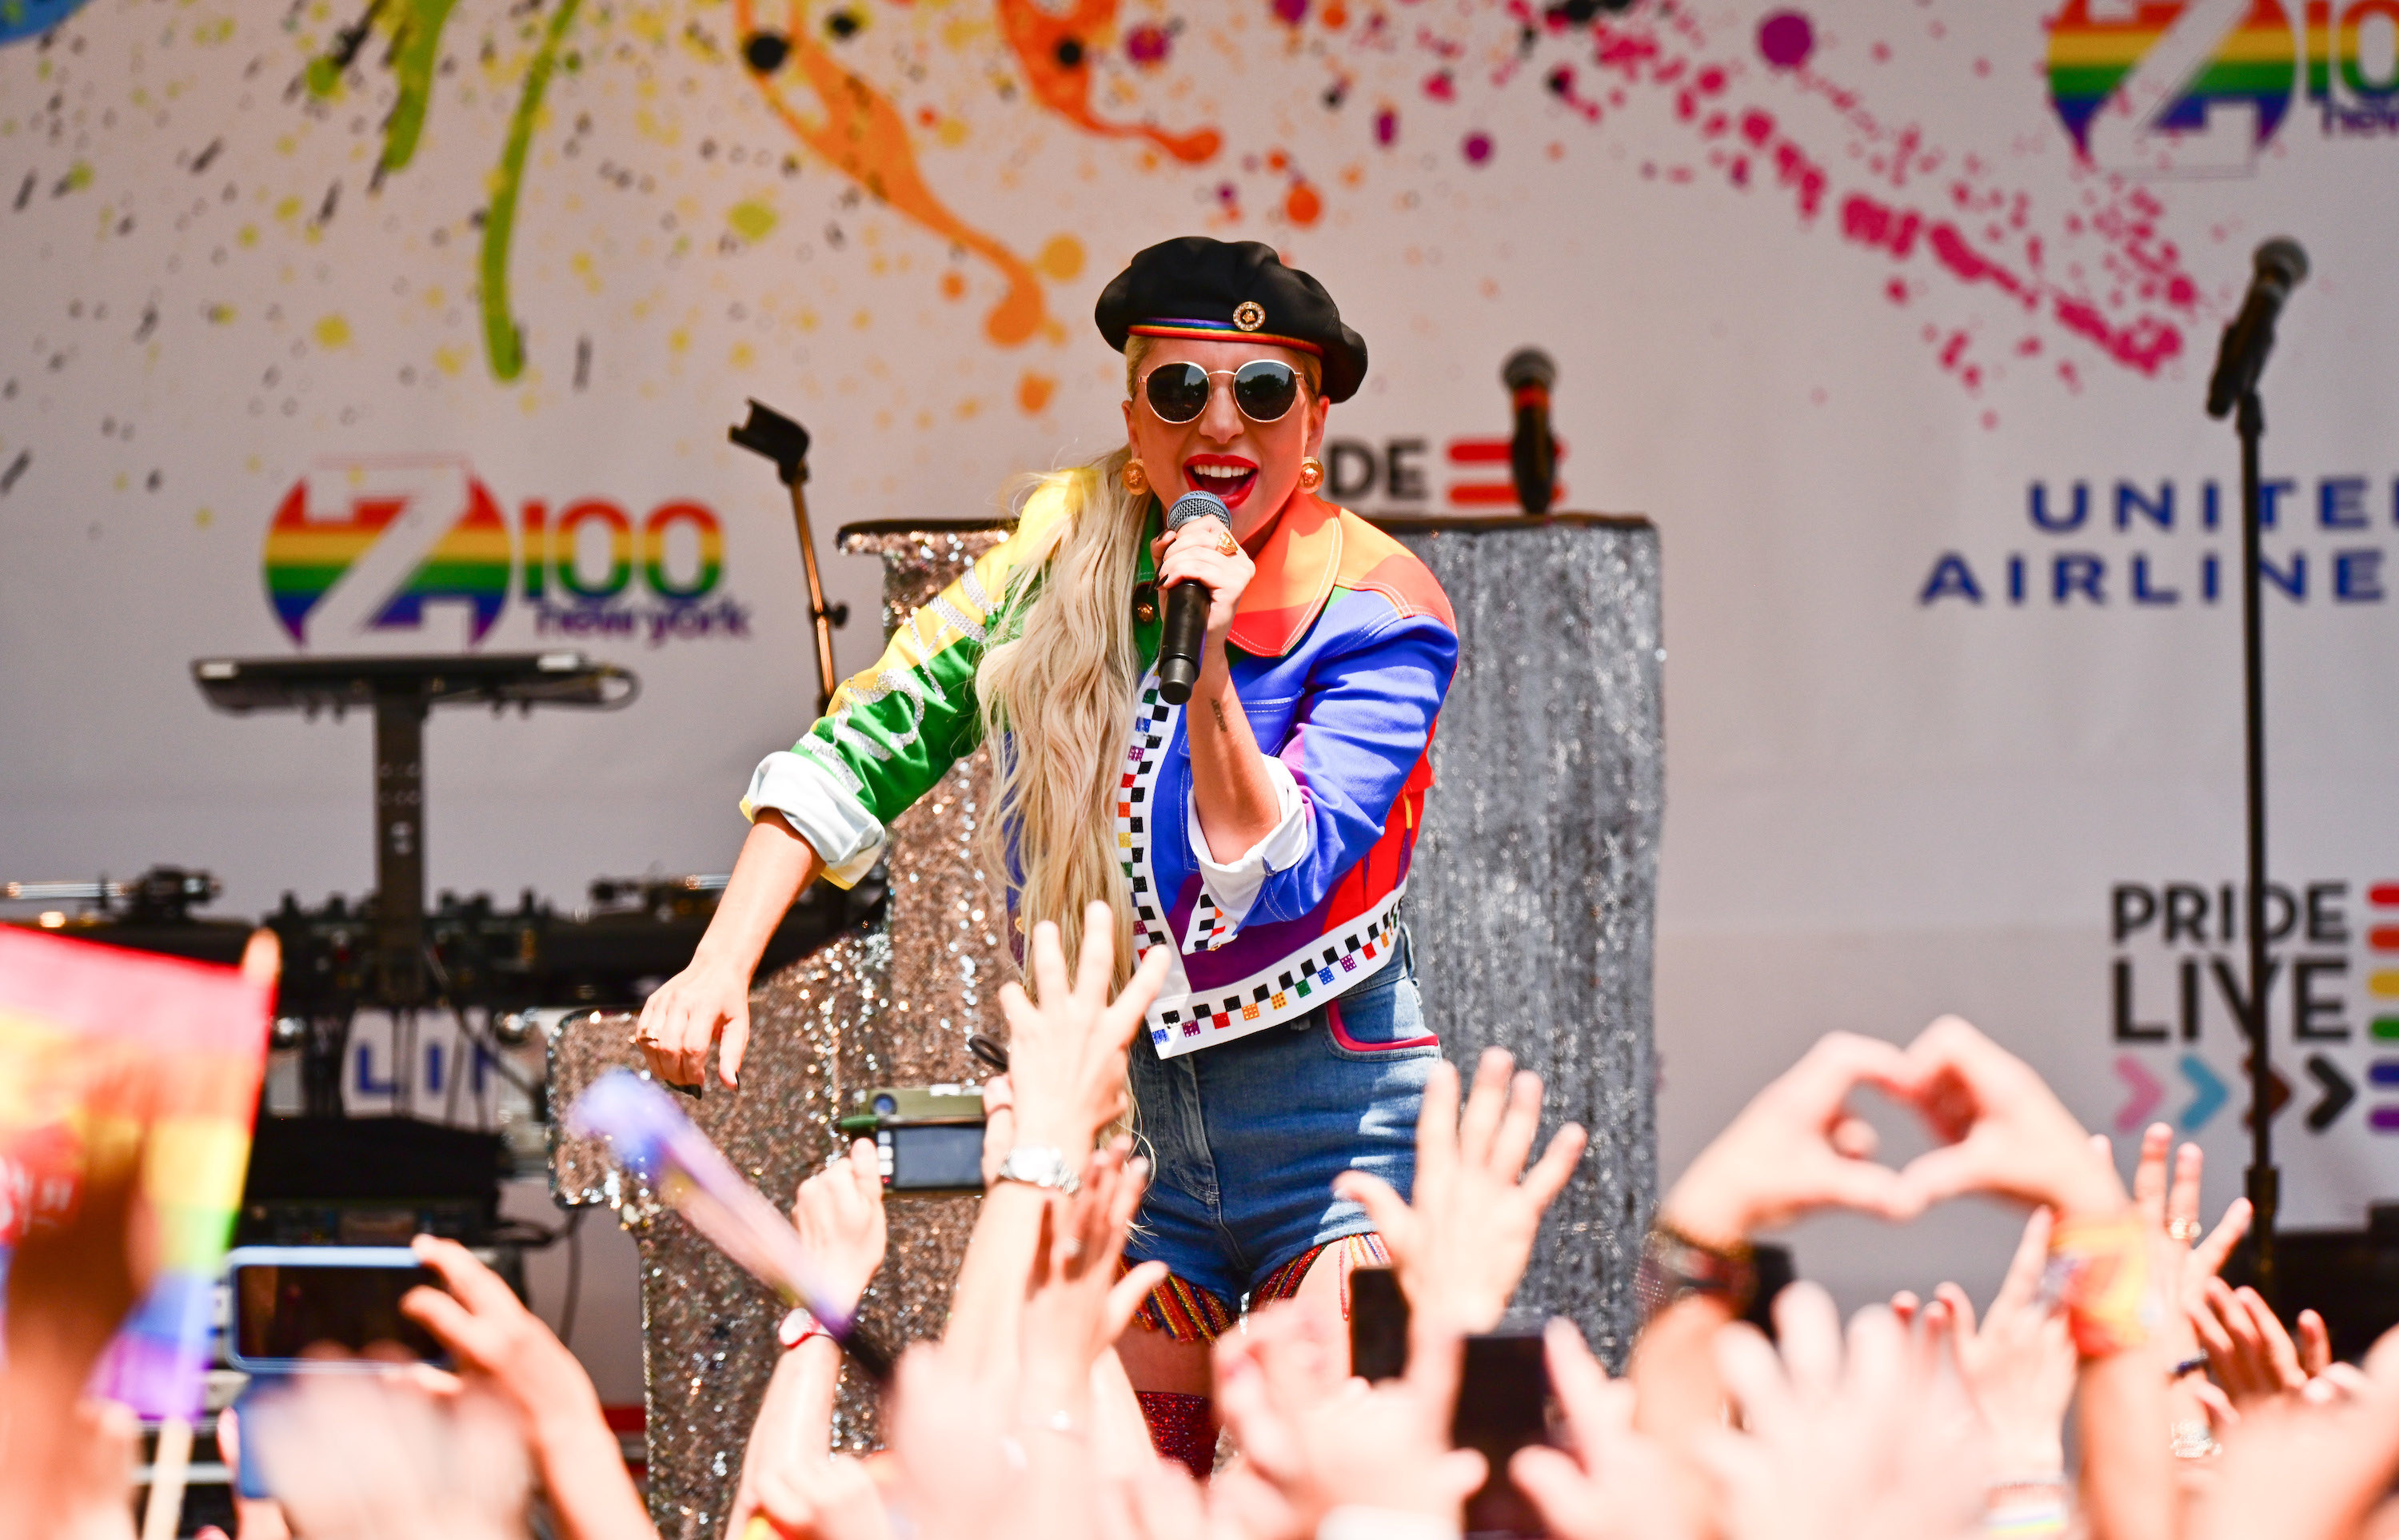 Lady Gaga at Pride Live&#x27;s 2019 Stonewall Day in New York City